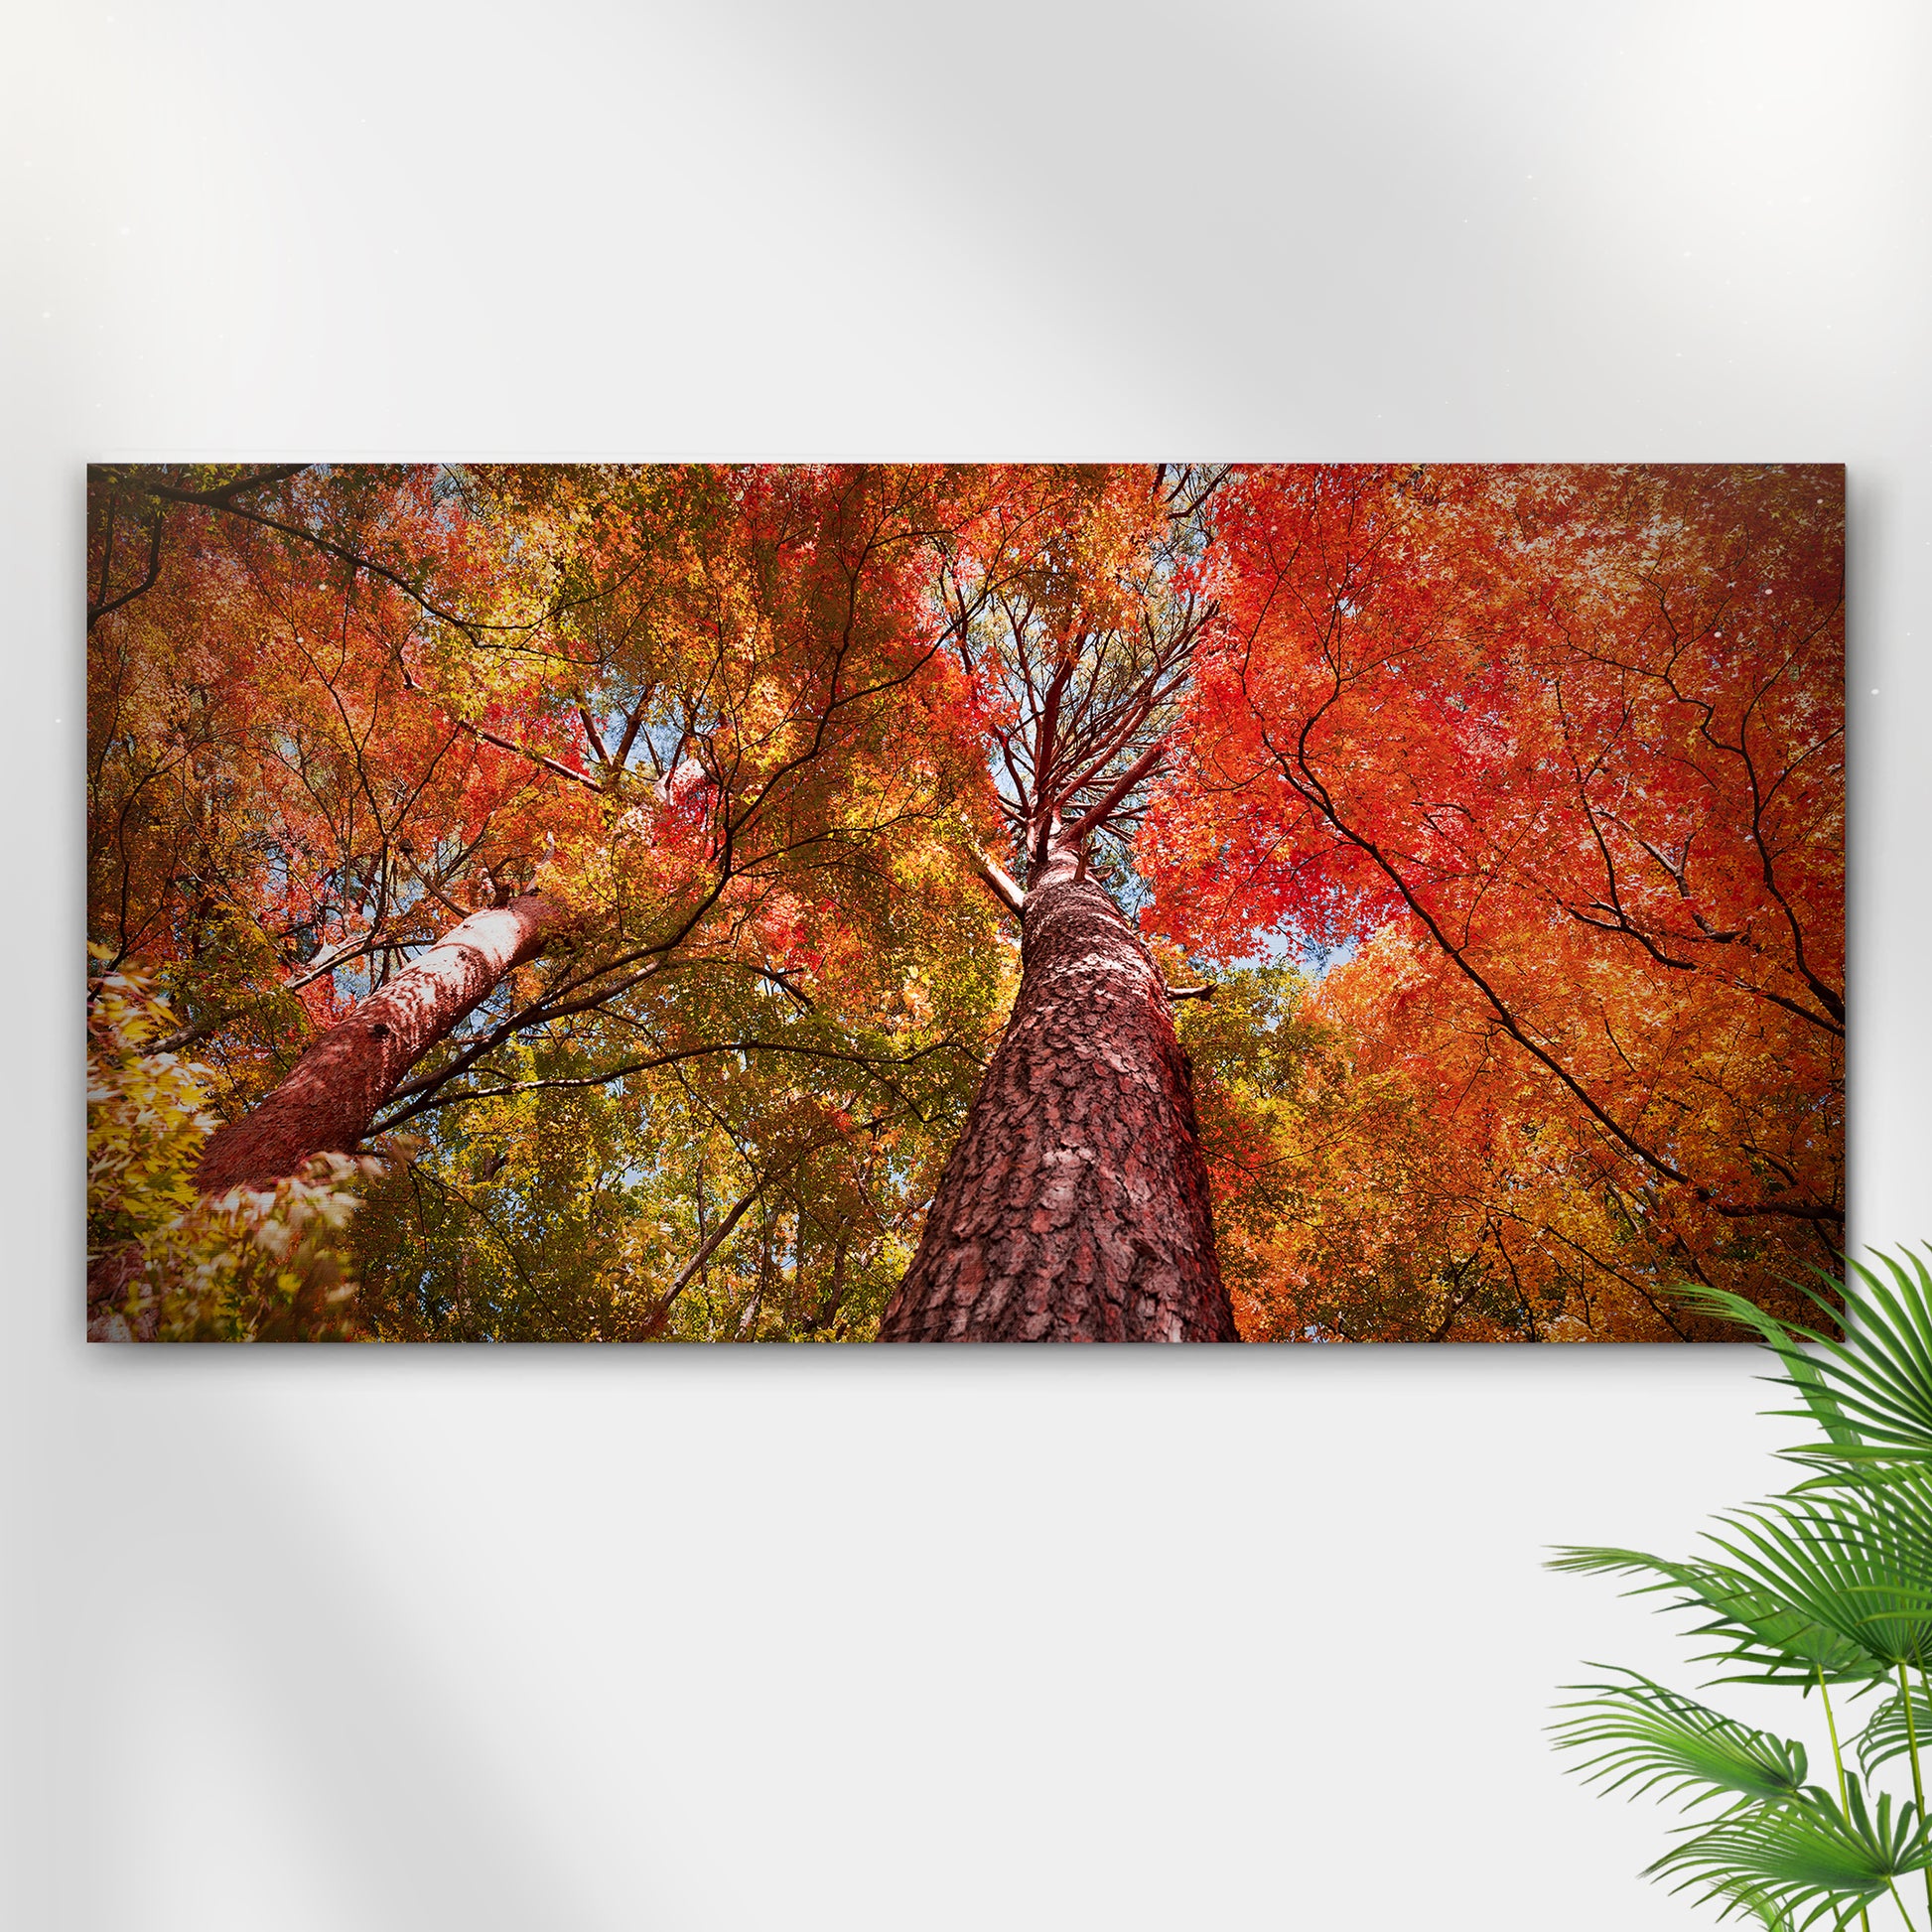 Under The Maple Trees On A Beautiful Morning Canvas Wall Art - Image by Tailored Canvases